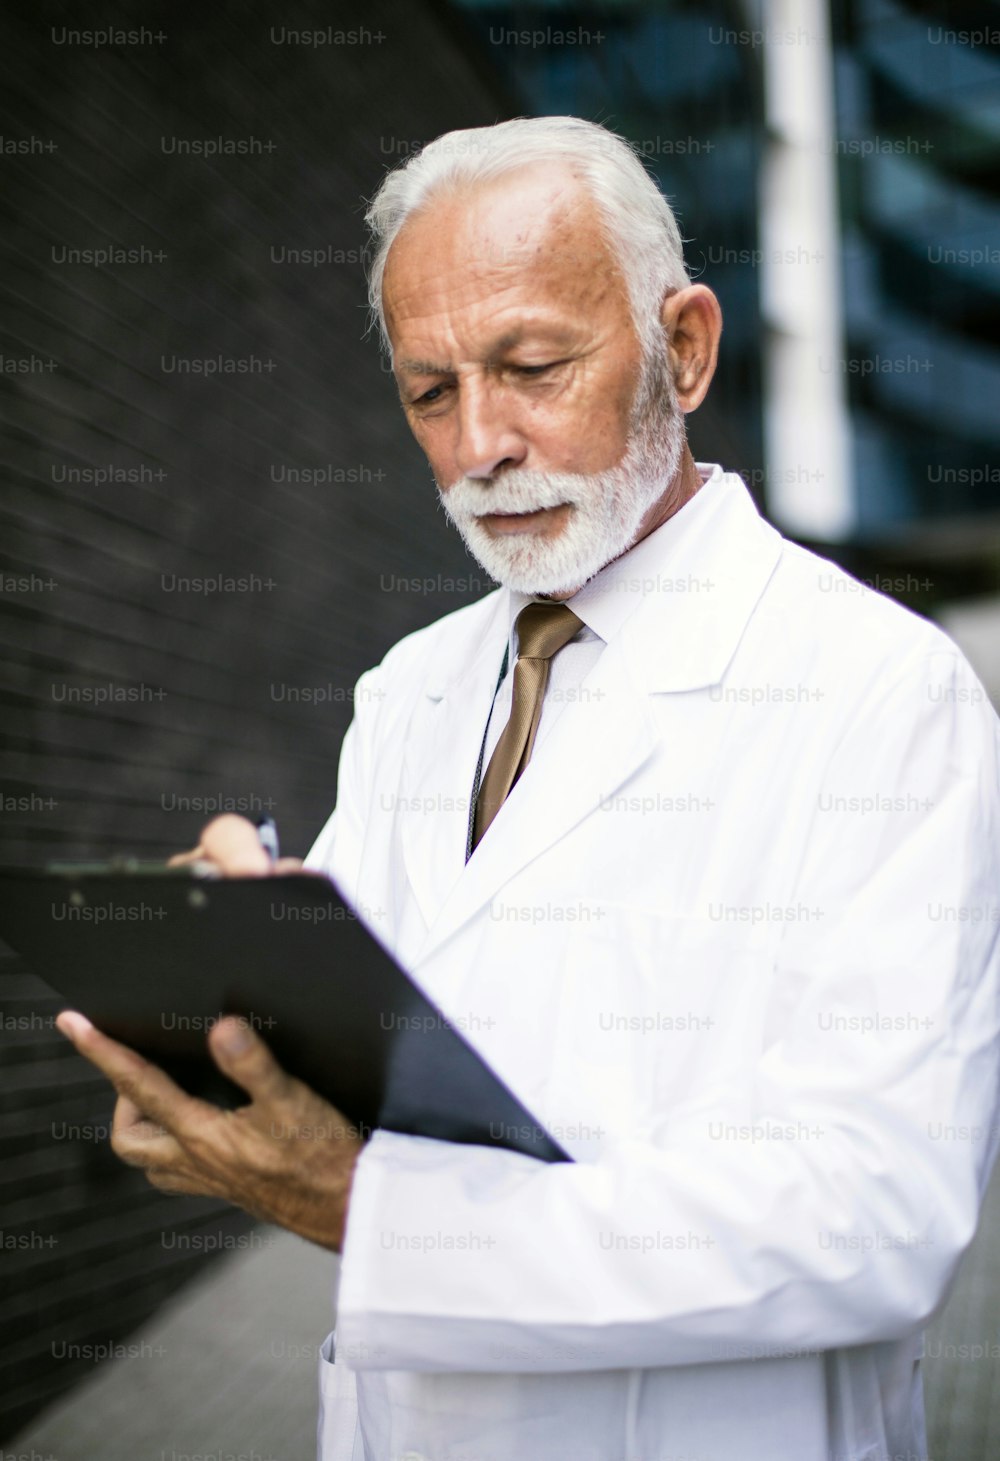 Senior doctor standing on street and writing on document.